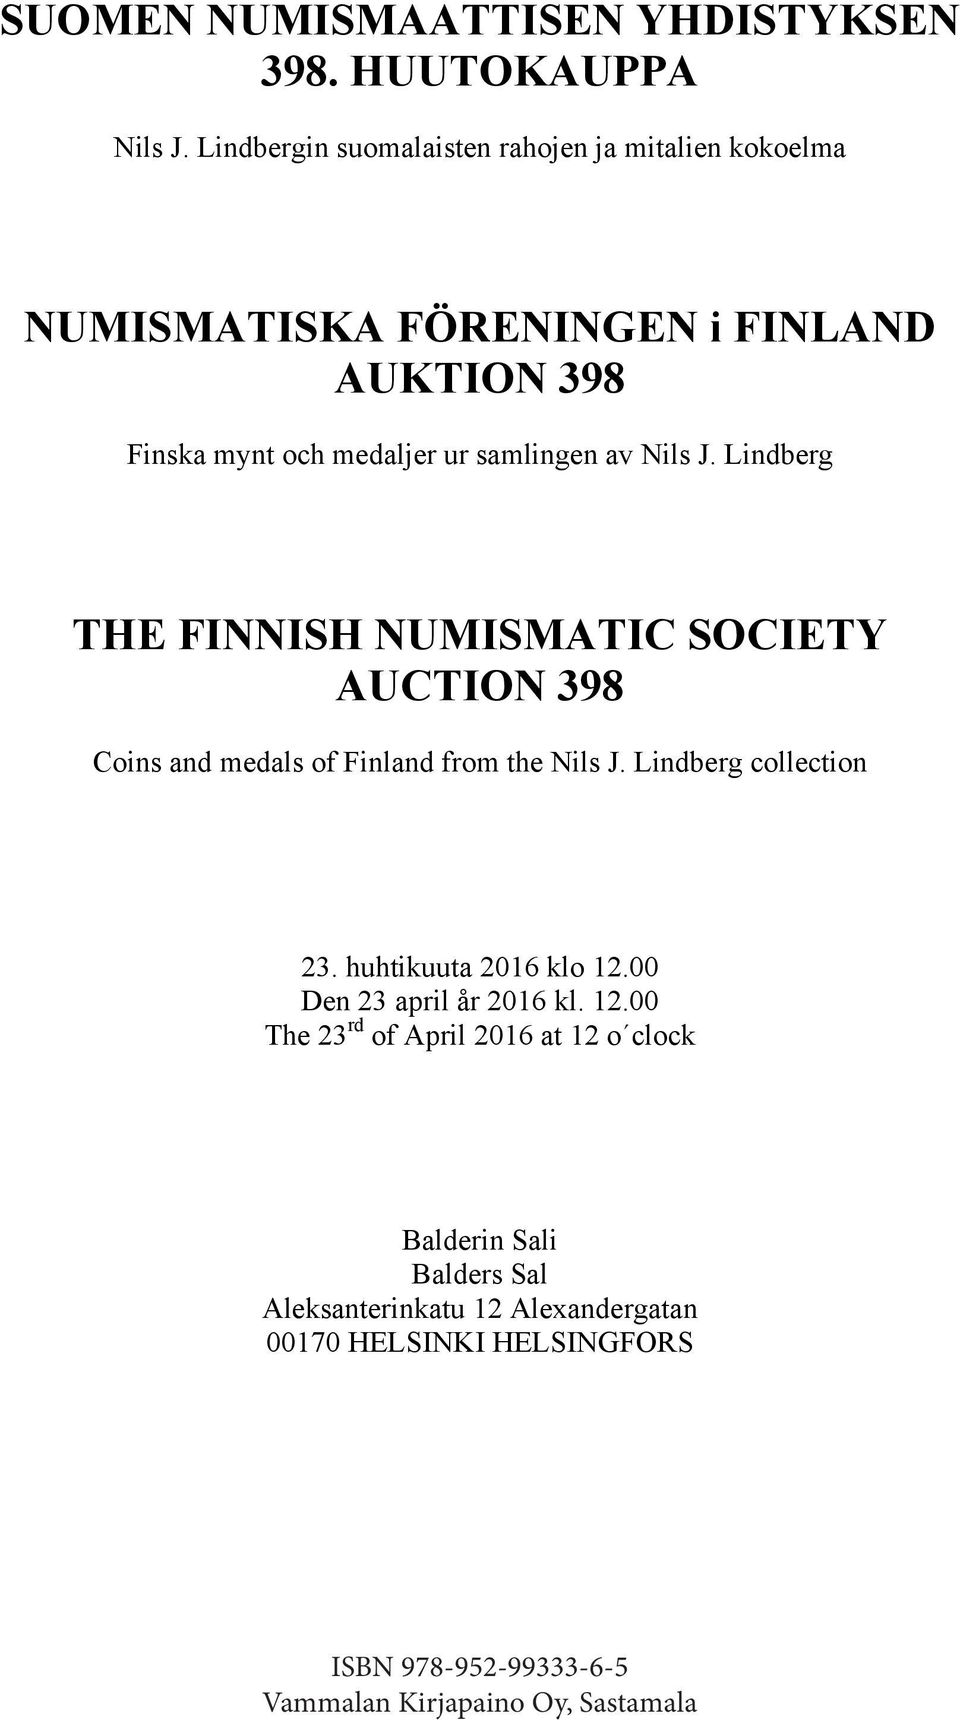 Nils J. Lindberg THE FINNISH NUMISMATIC SOCIETY AUCTION 398 Coins and medals of Finland from the Nils J. Lindberg collection 23.